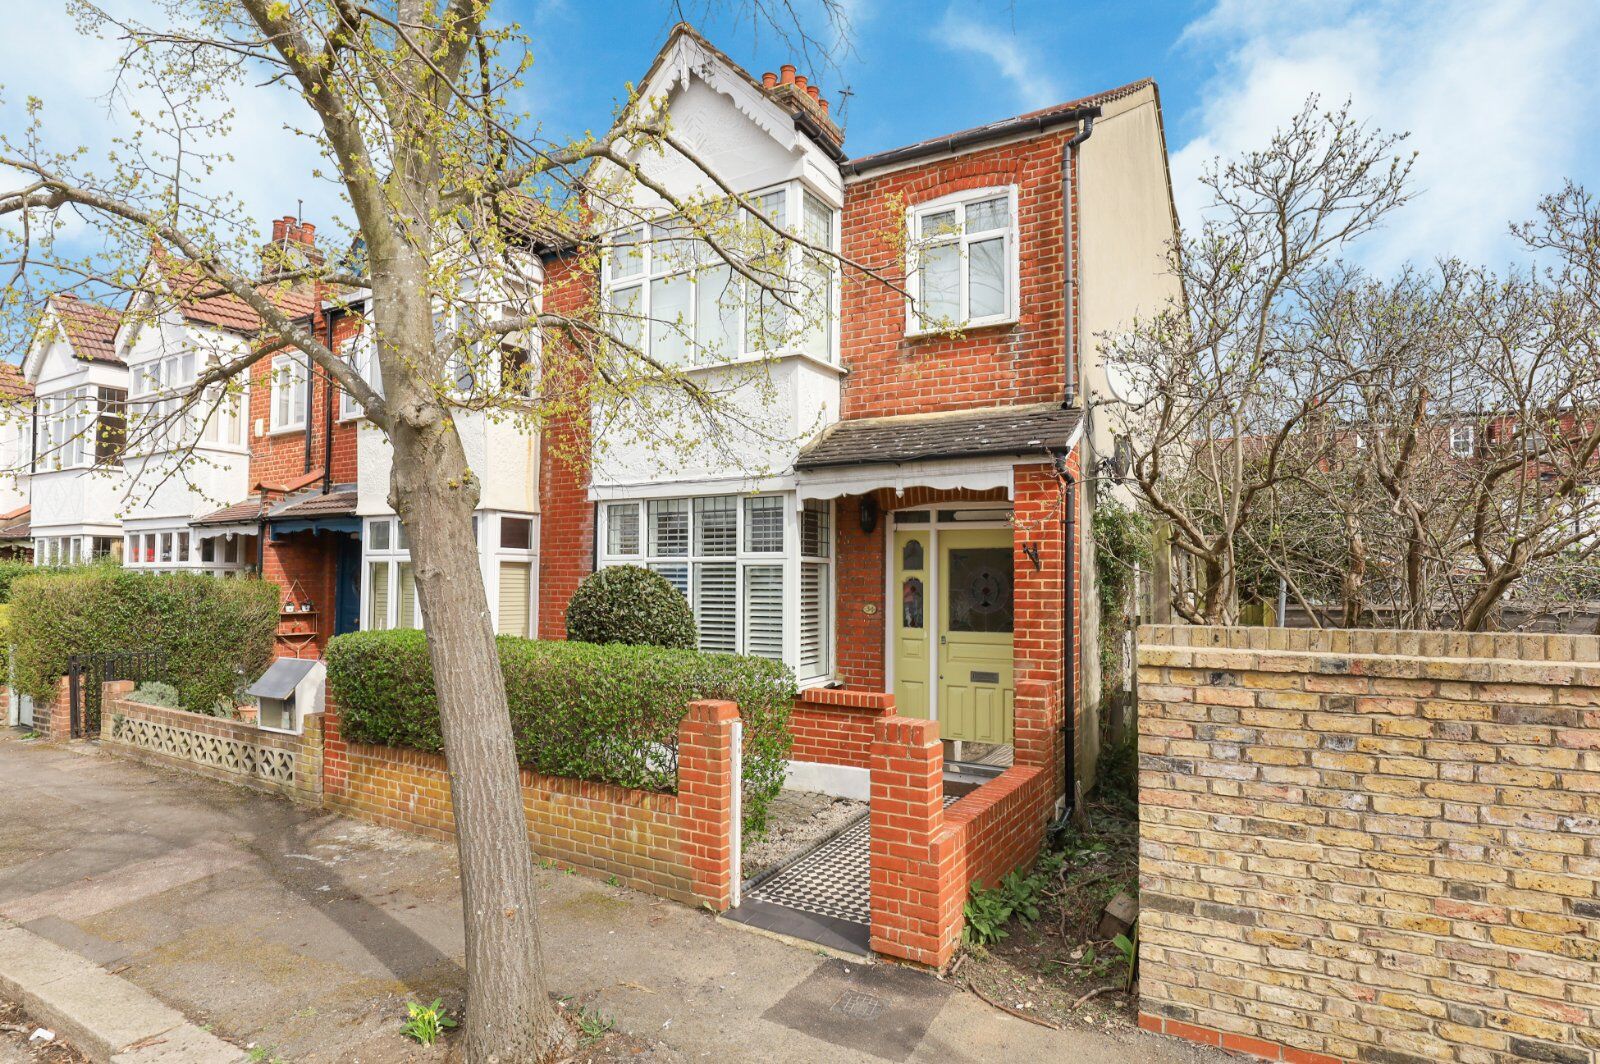 4 bedroom mid terraced house for sale Mina Road, Old Merton Park, SW19, main image